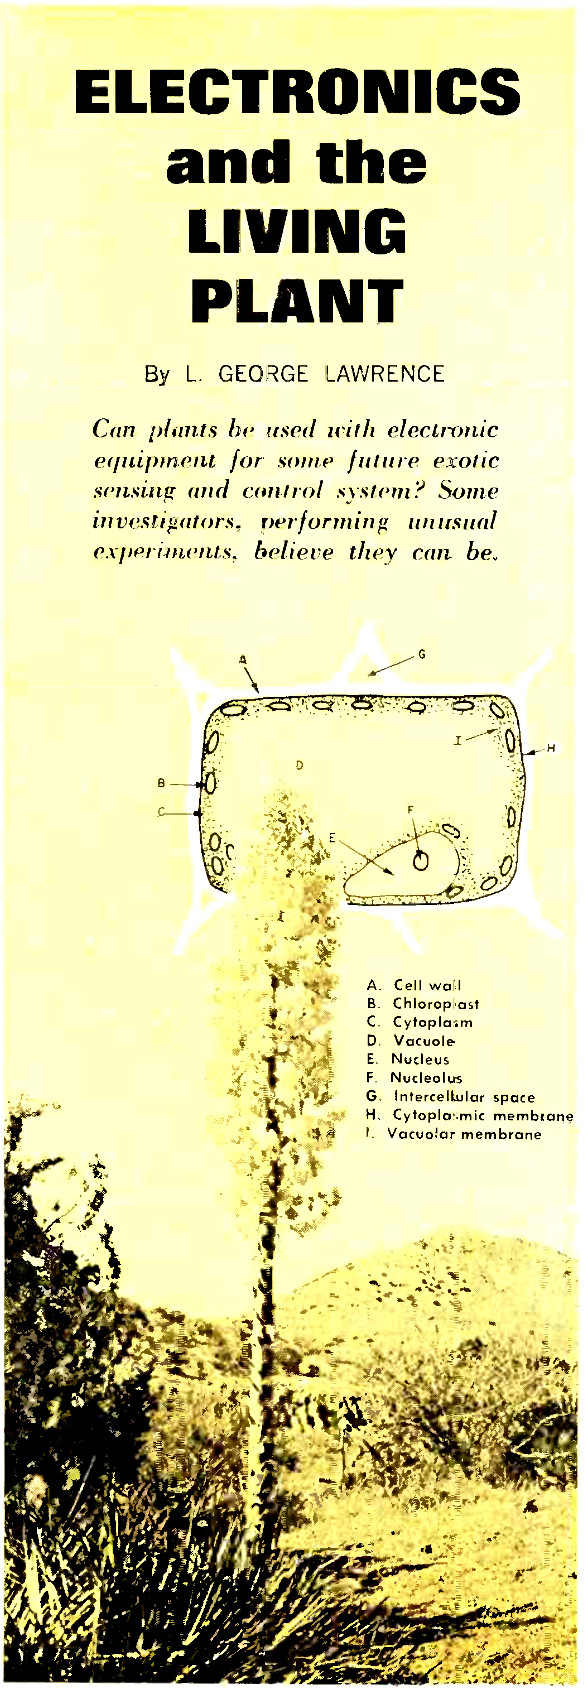 Text: ELECTRONICS and the LIVING PLANT by L. George Lawrence - Can plants be used with electronic equipment for some future exotic sensing and control system? Some investigators, performing unusual experiments, believe they can. (Image features a desert background with a tree and bushes, a plant cell diagram superimposed above, illustrating the cell wall, chloroplast, cytoplasm, etcetera.)